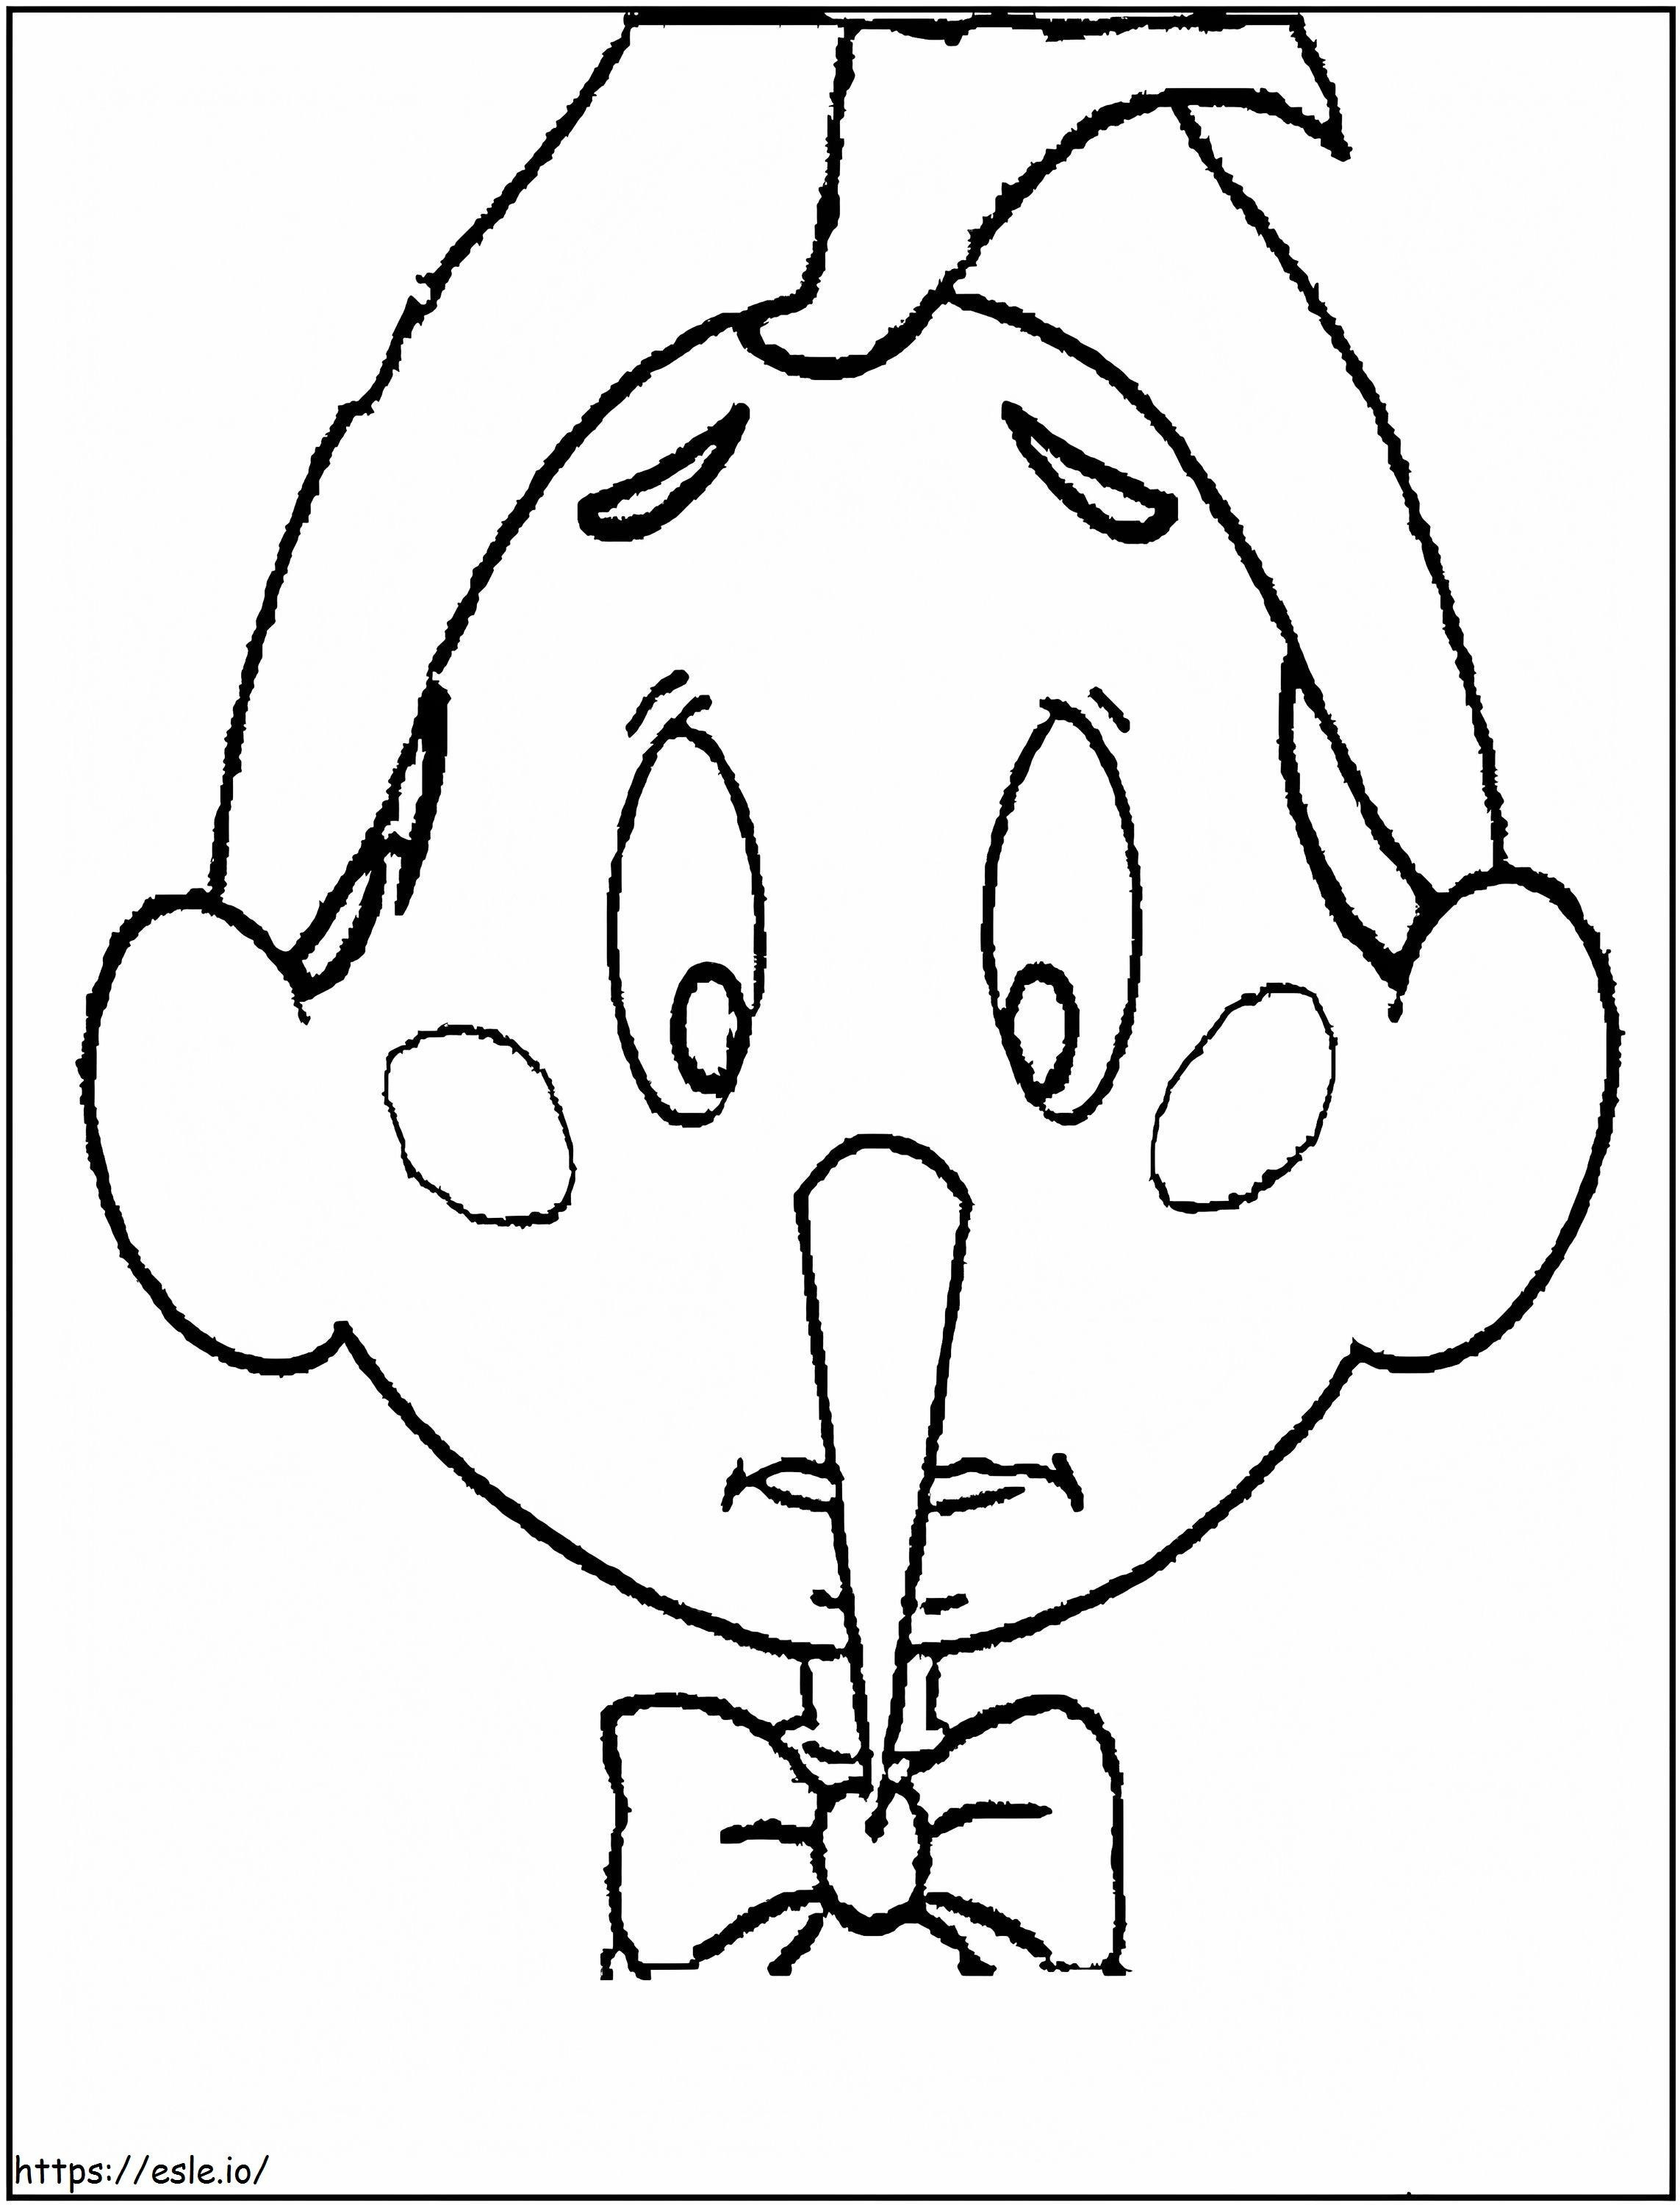 Scary Pinocchio coloring page